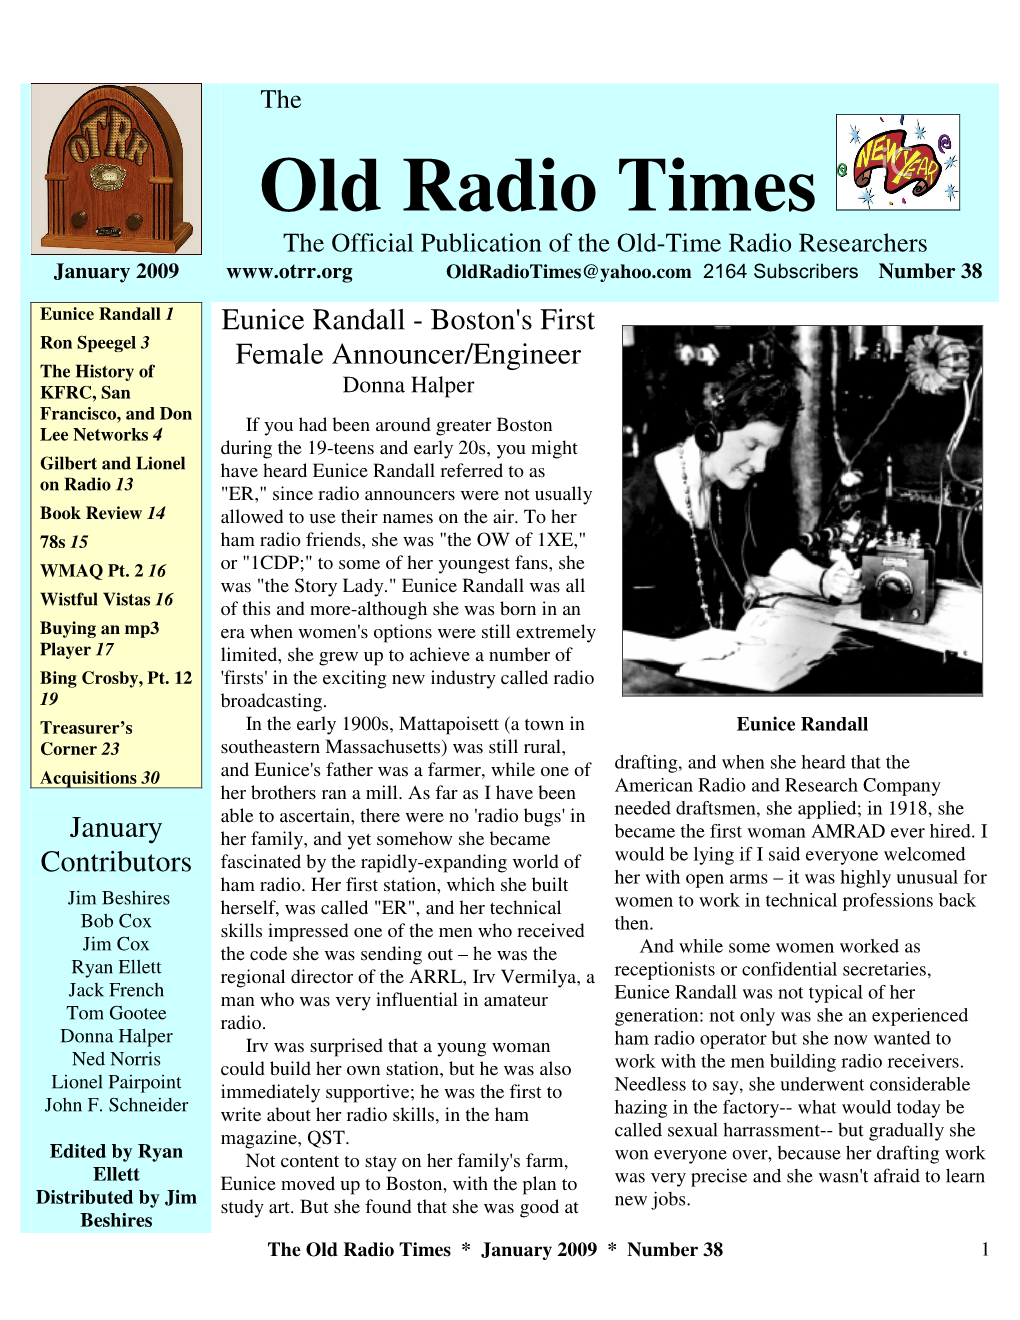 Old Radio Times the Official Publication of the Old-Time Radio Researchers January 2009 Oldradiotimes@Yahoo.Com 2164 Subscribers Number 38